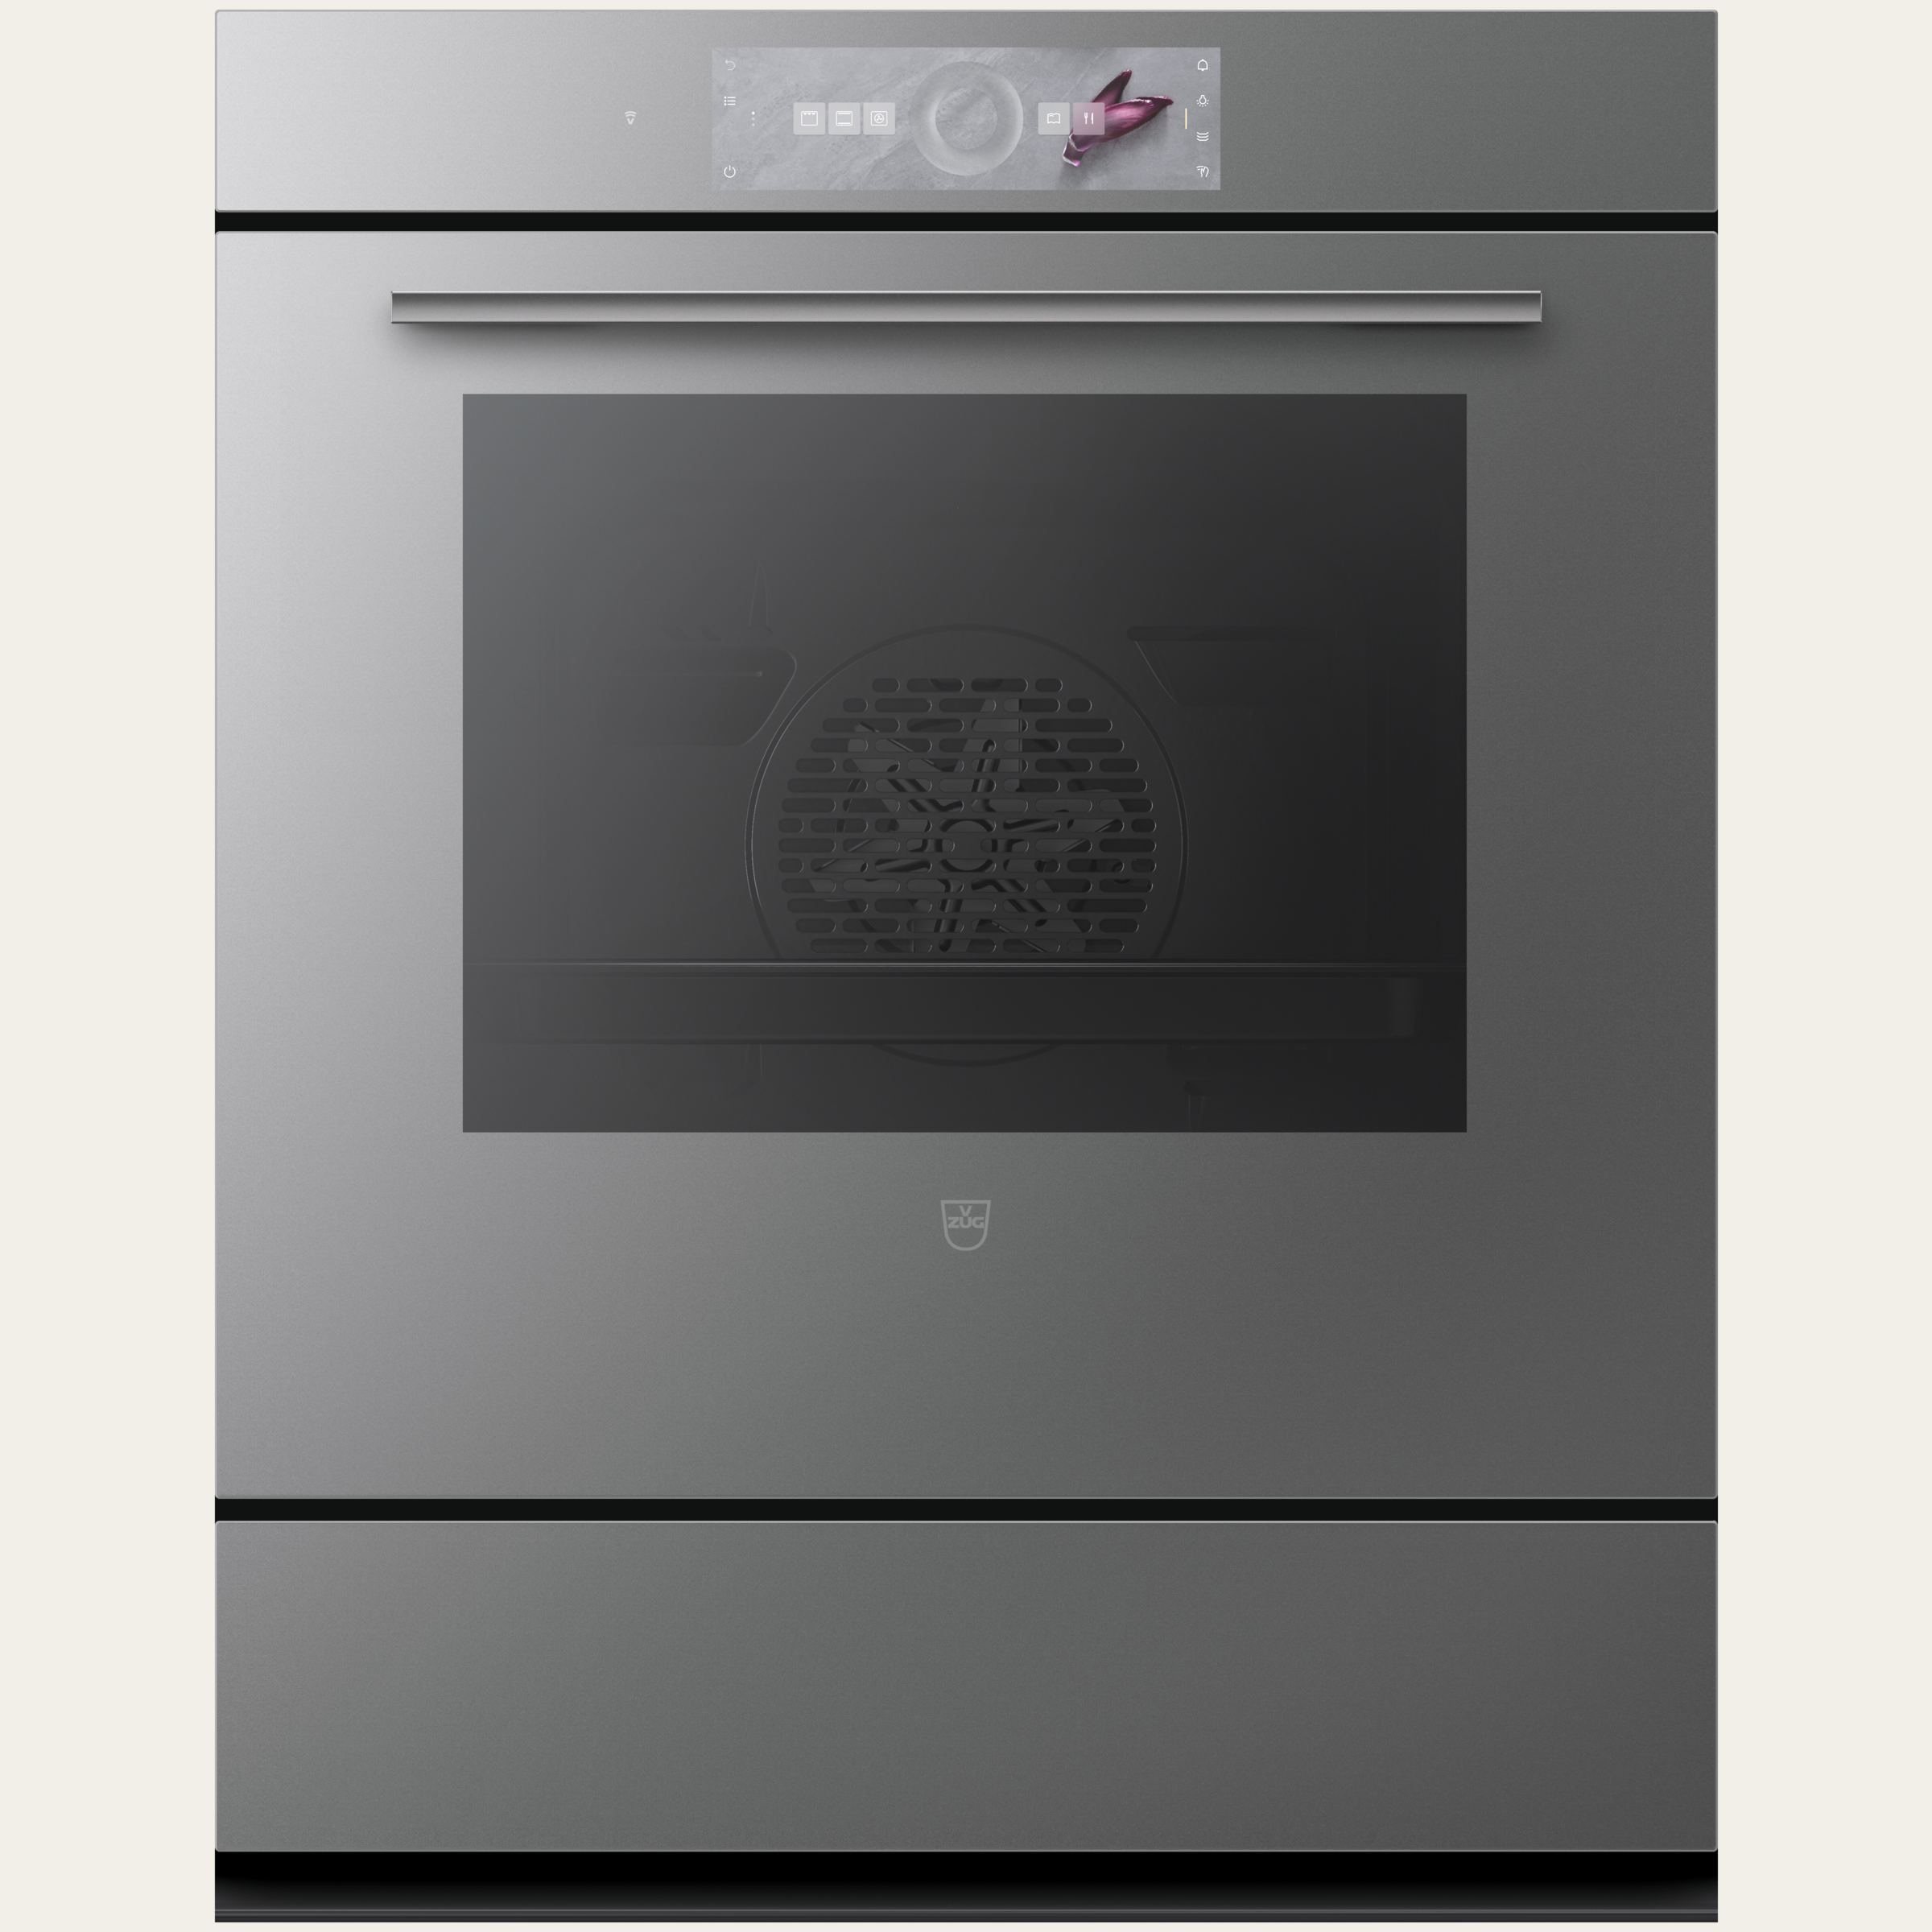 V-ZUG Oven Combair V4000 76P, Standard width: 60 cm,Standard height: 76.2 cm, Platinum mirror glass, Touchscreen with CircleSlider, V-ZUG-Home, Heatable appliance drawer, Pyrolytic self-cleaning